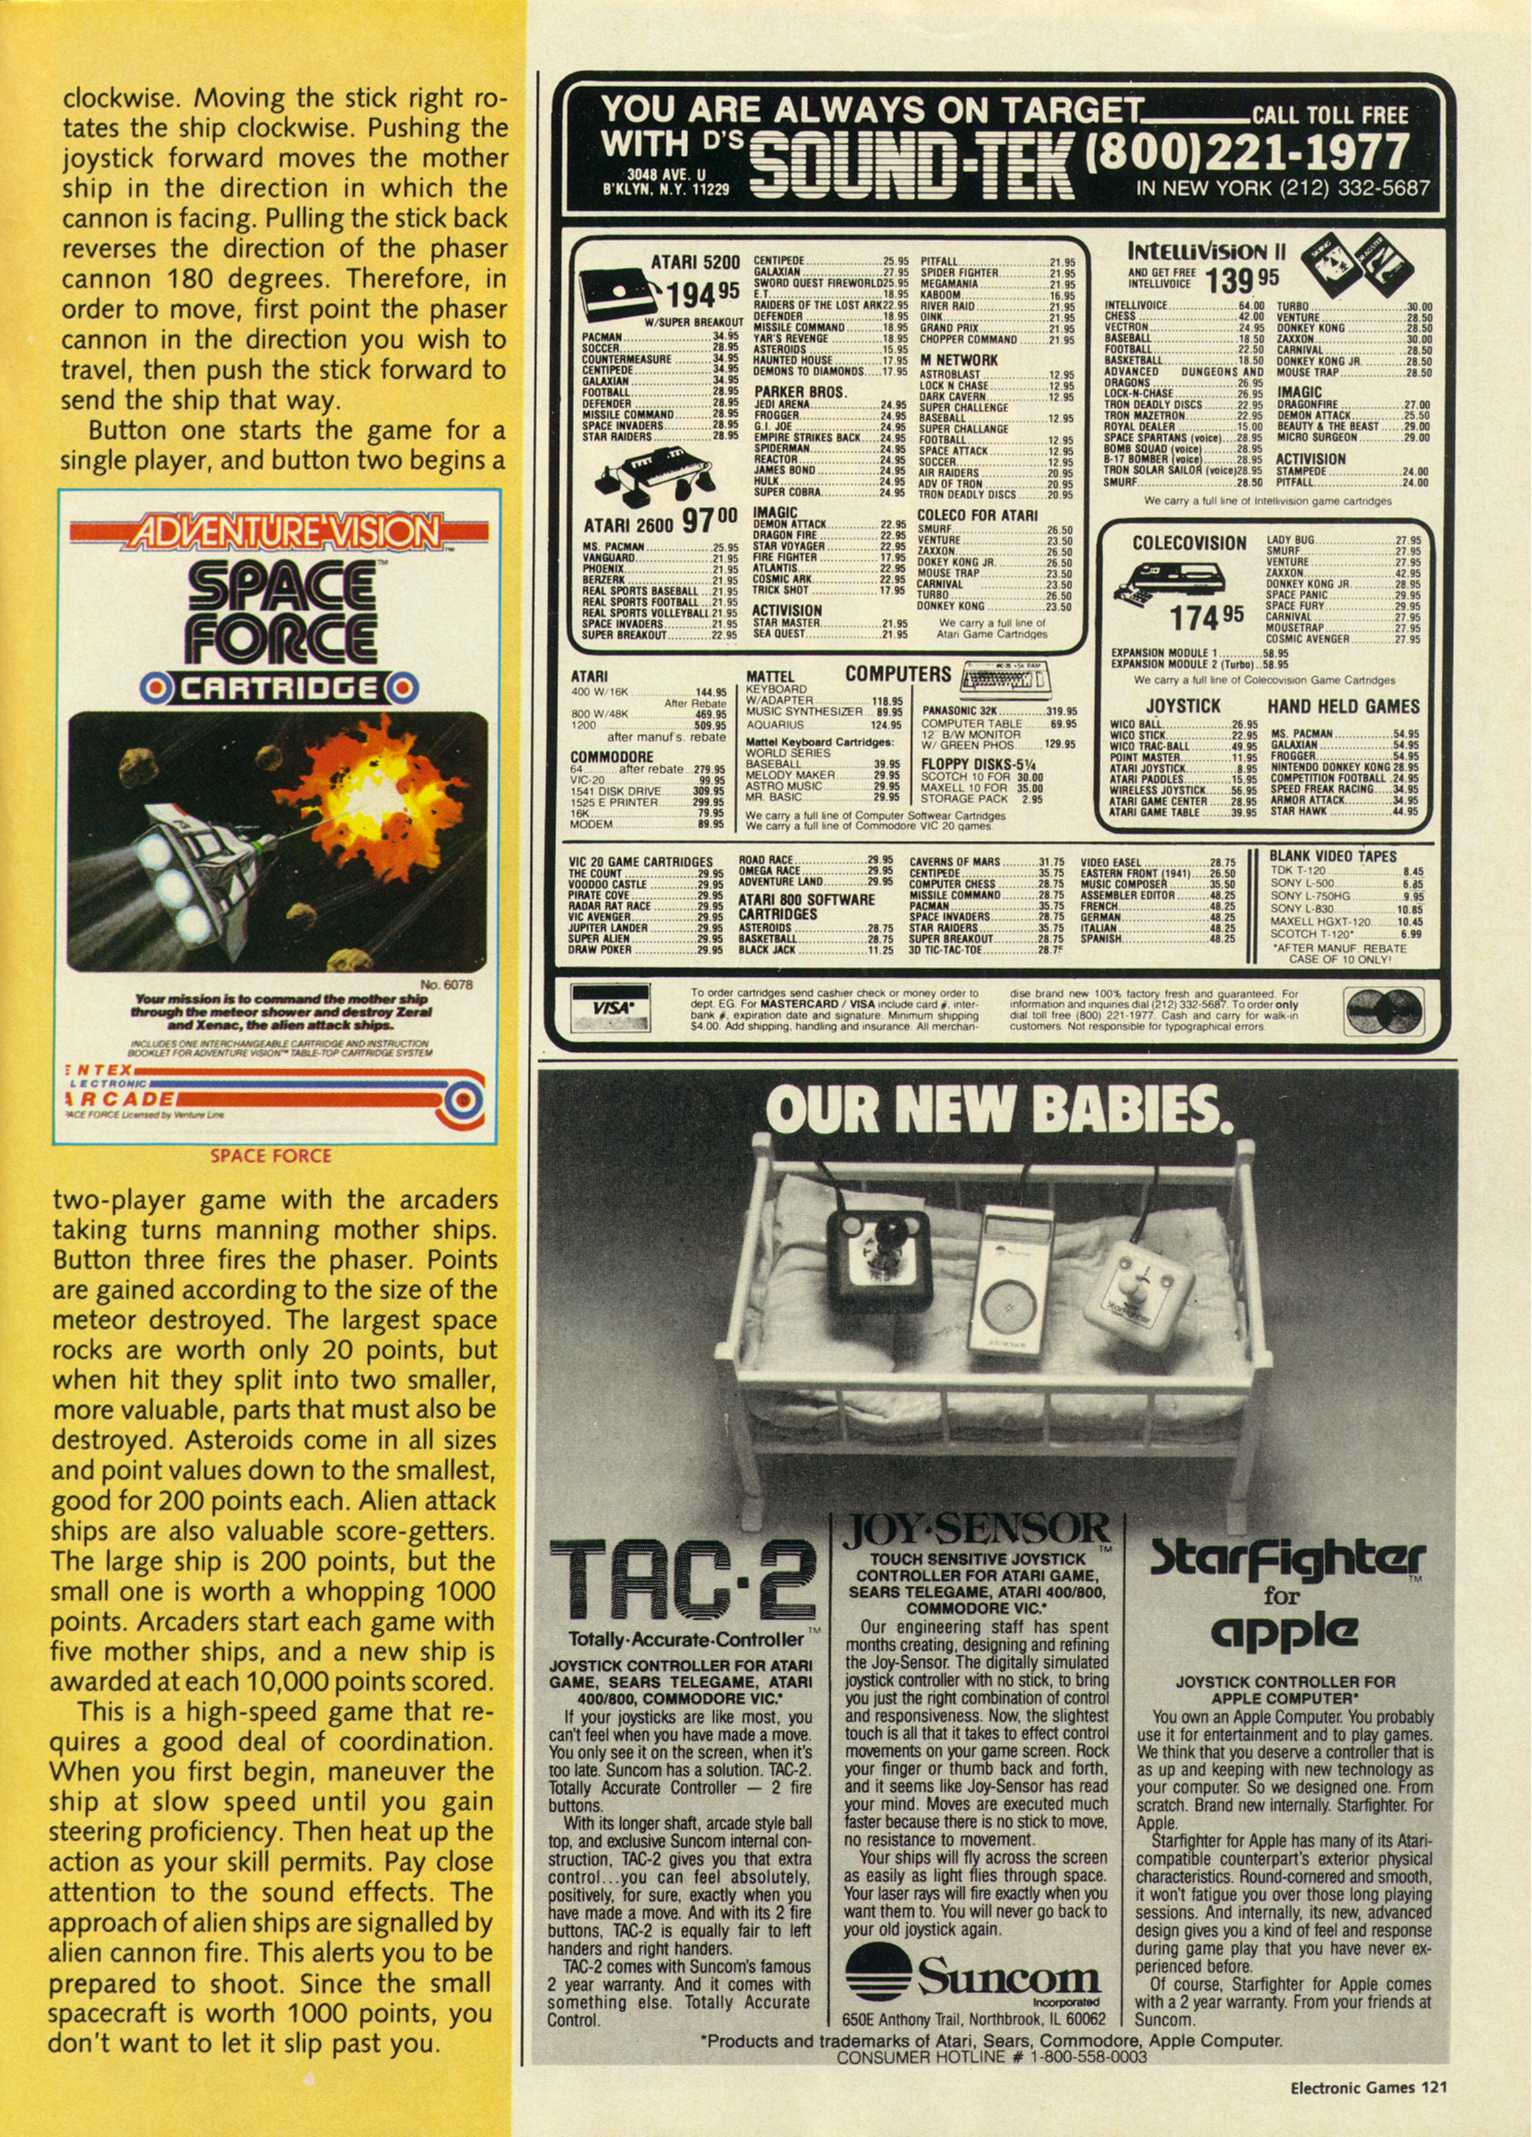 Electronic Games - July 1983